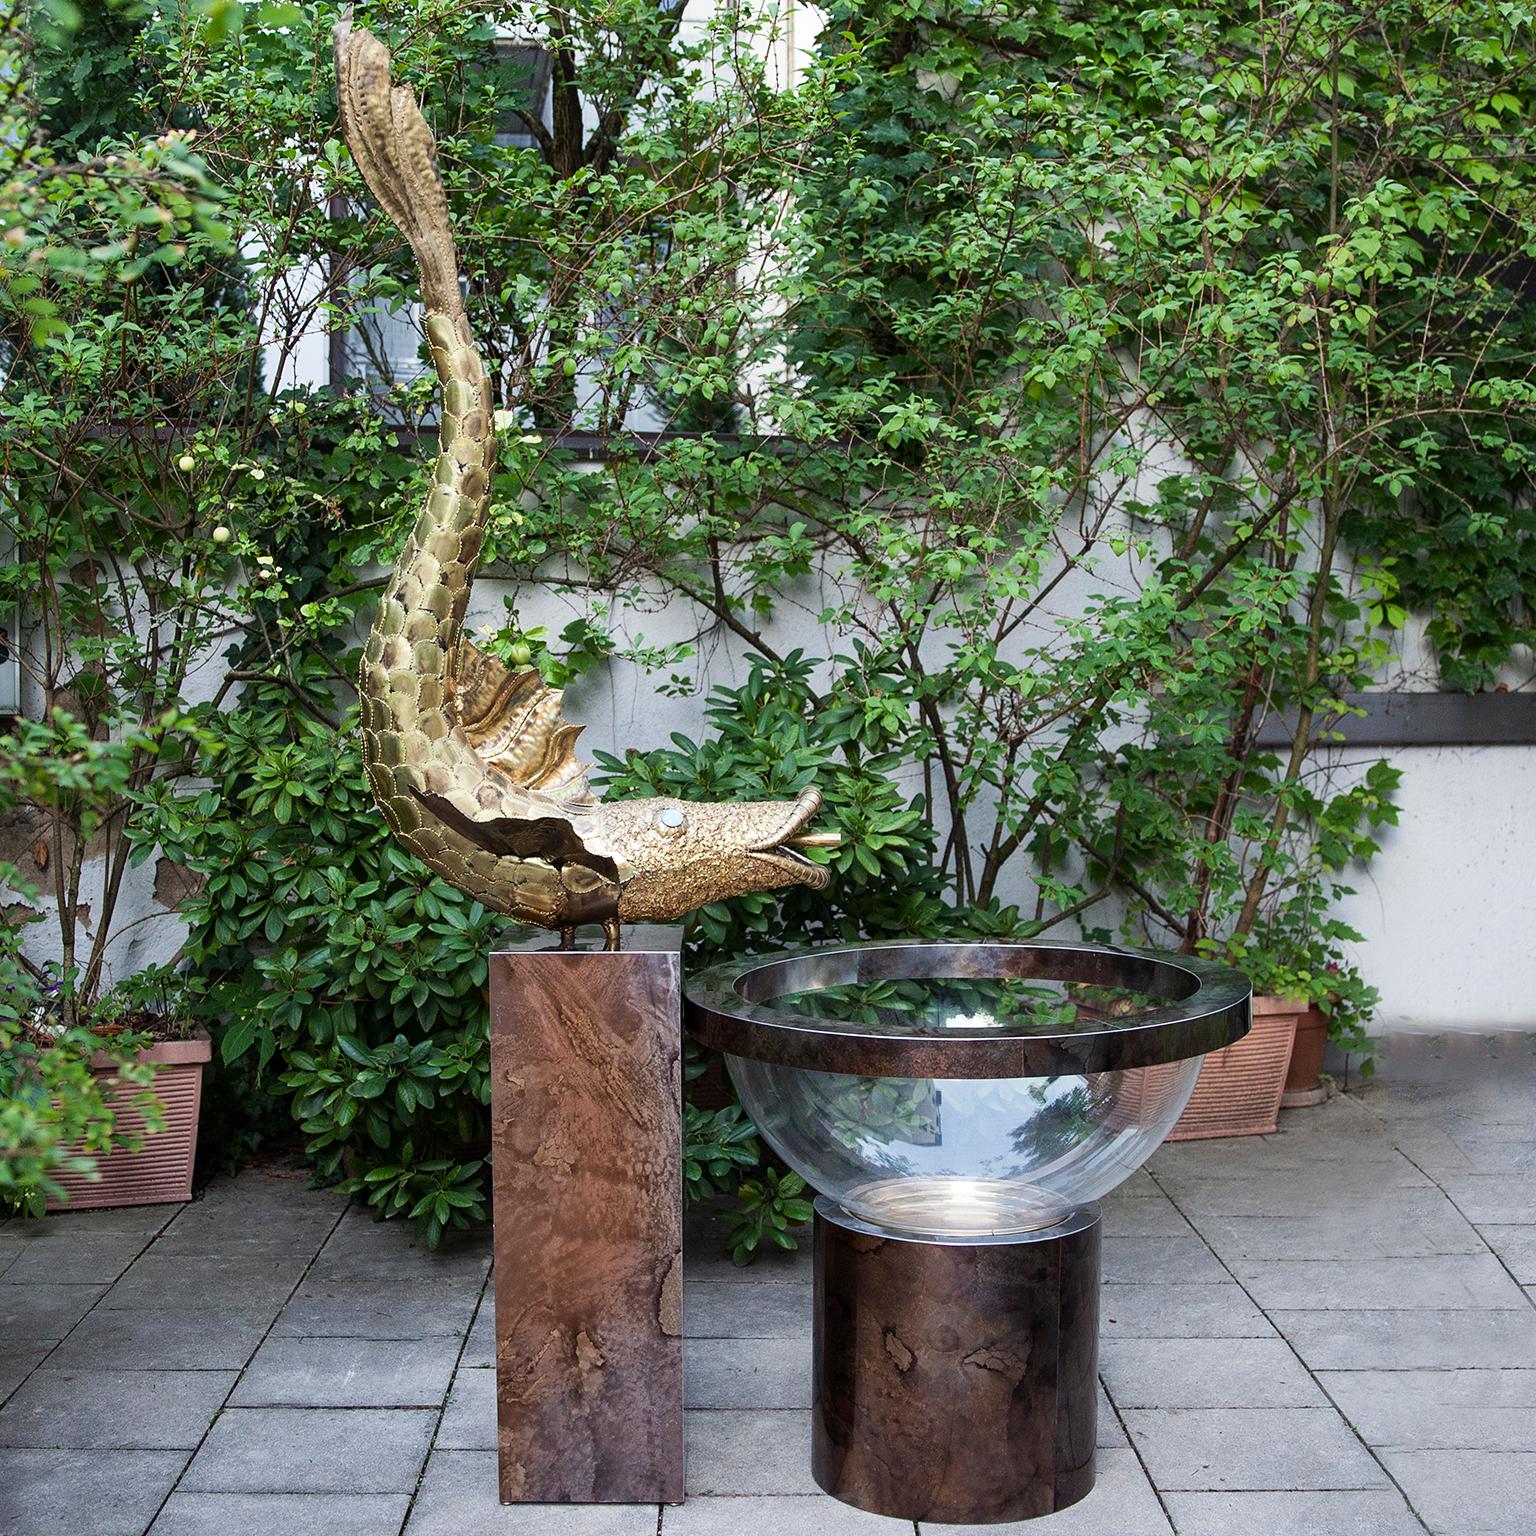 Amazing indoor fountain in brass and lucite designed by Henri Fernandez France, 1970s. The brutalist fish is made in brass with turquoise gems eyes and the basin is made in lucite and has a diameter of 90cm.

Henri Fernandez is a metal sculptural